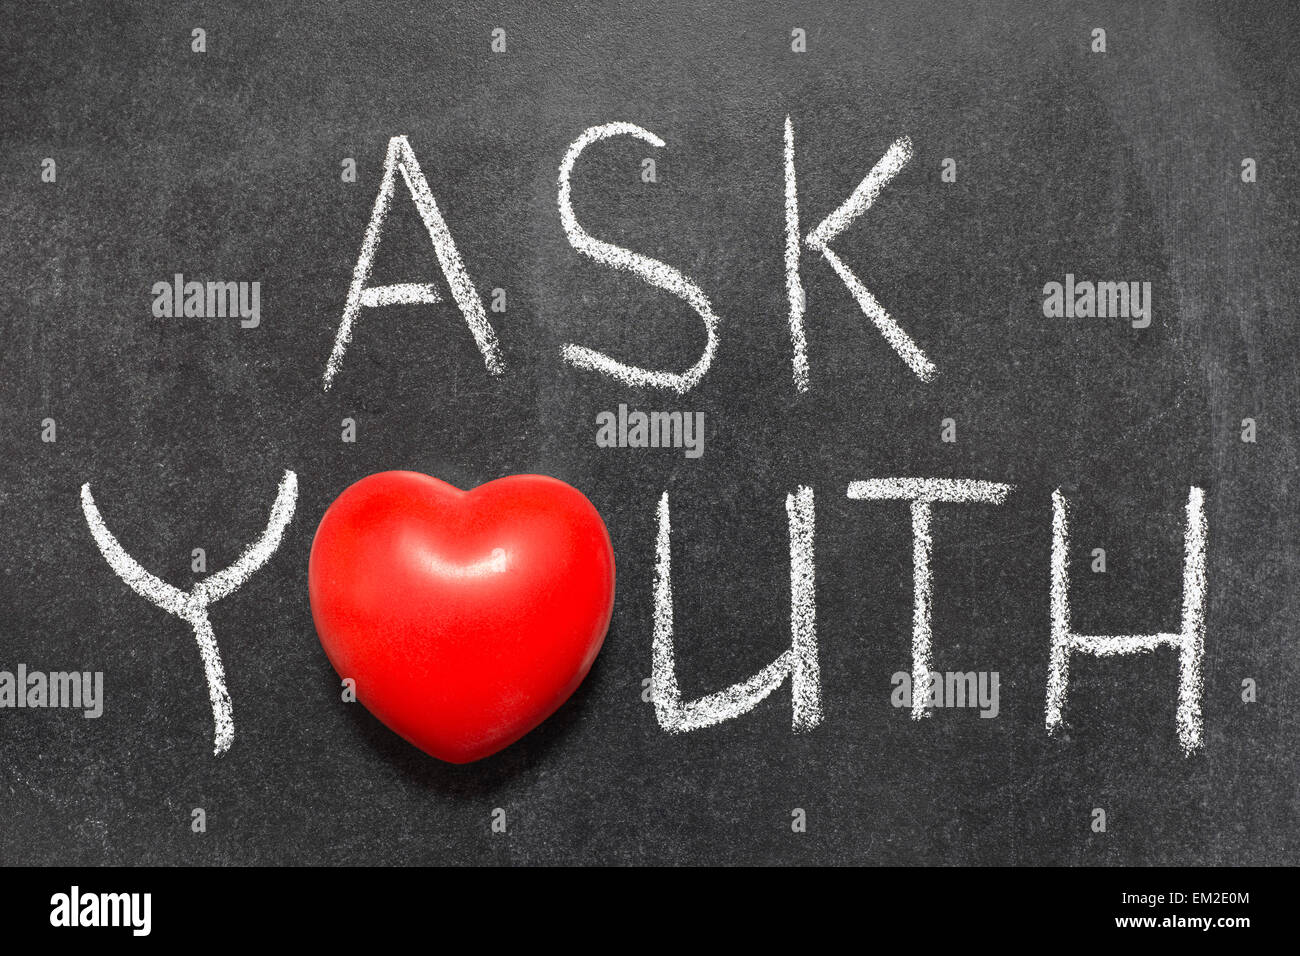 ask youth phrase handwritten on blackboard with heart symbol instead of O Stock Photo